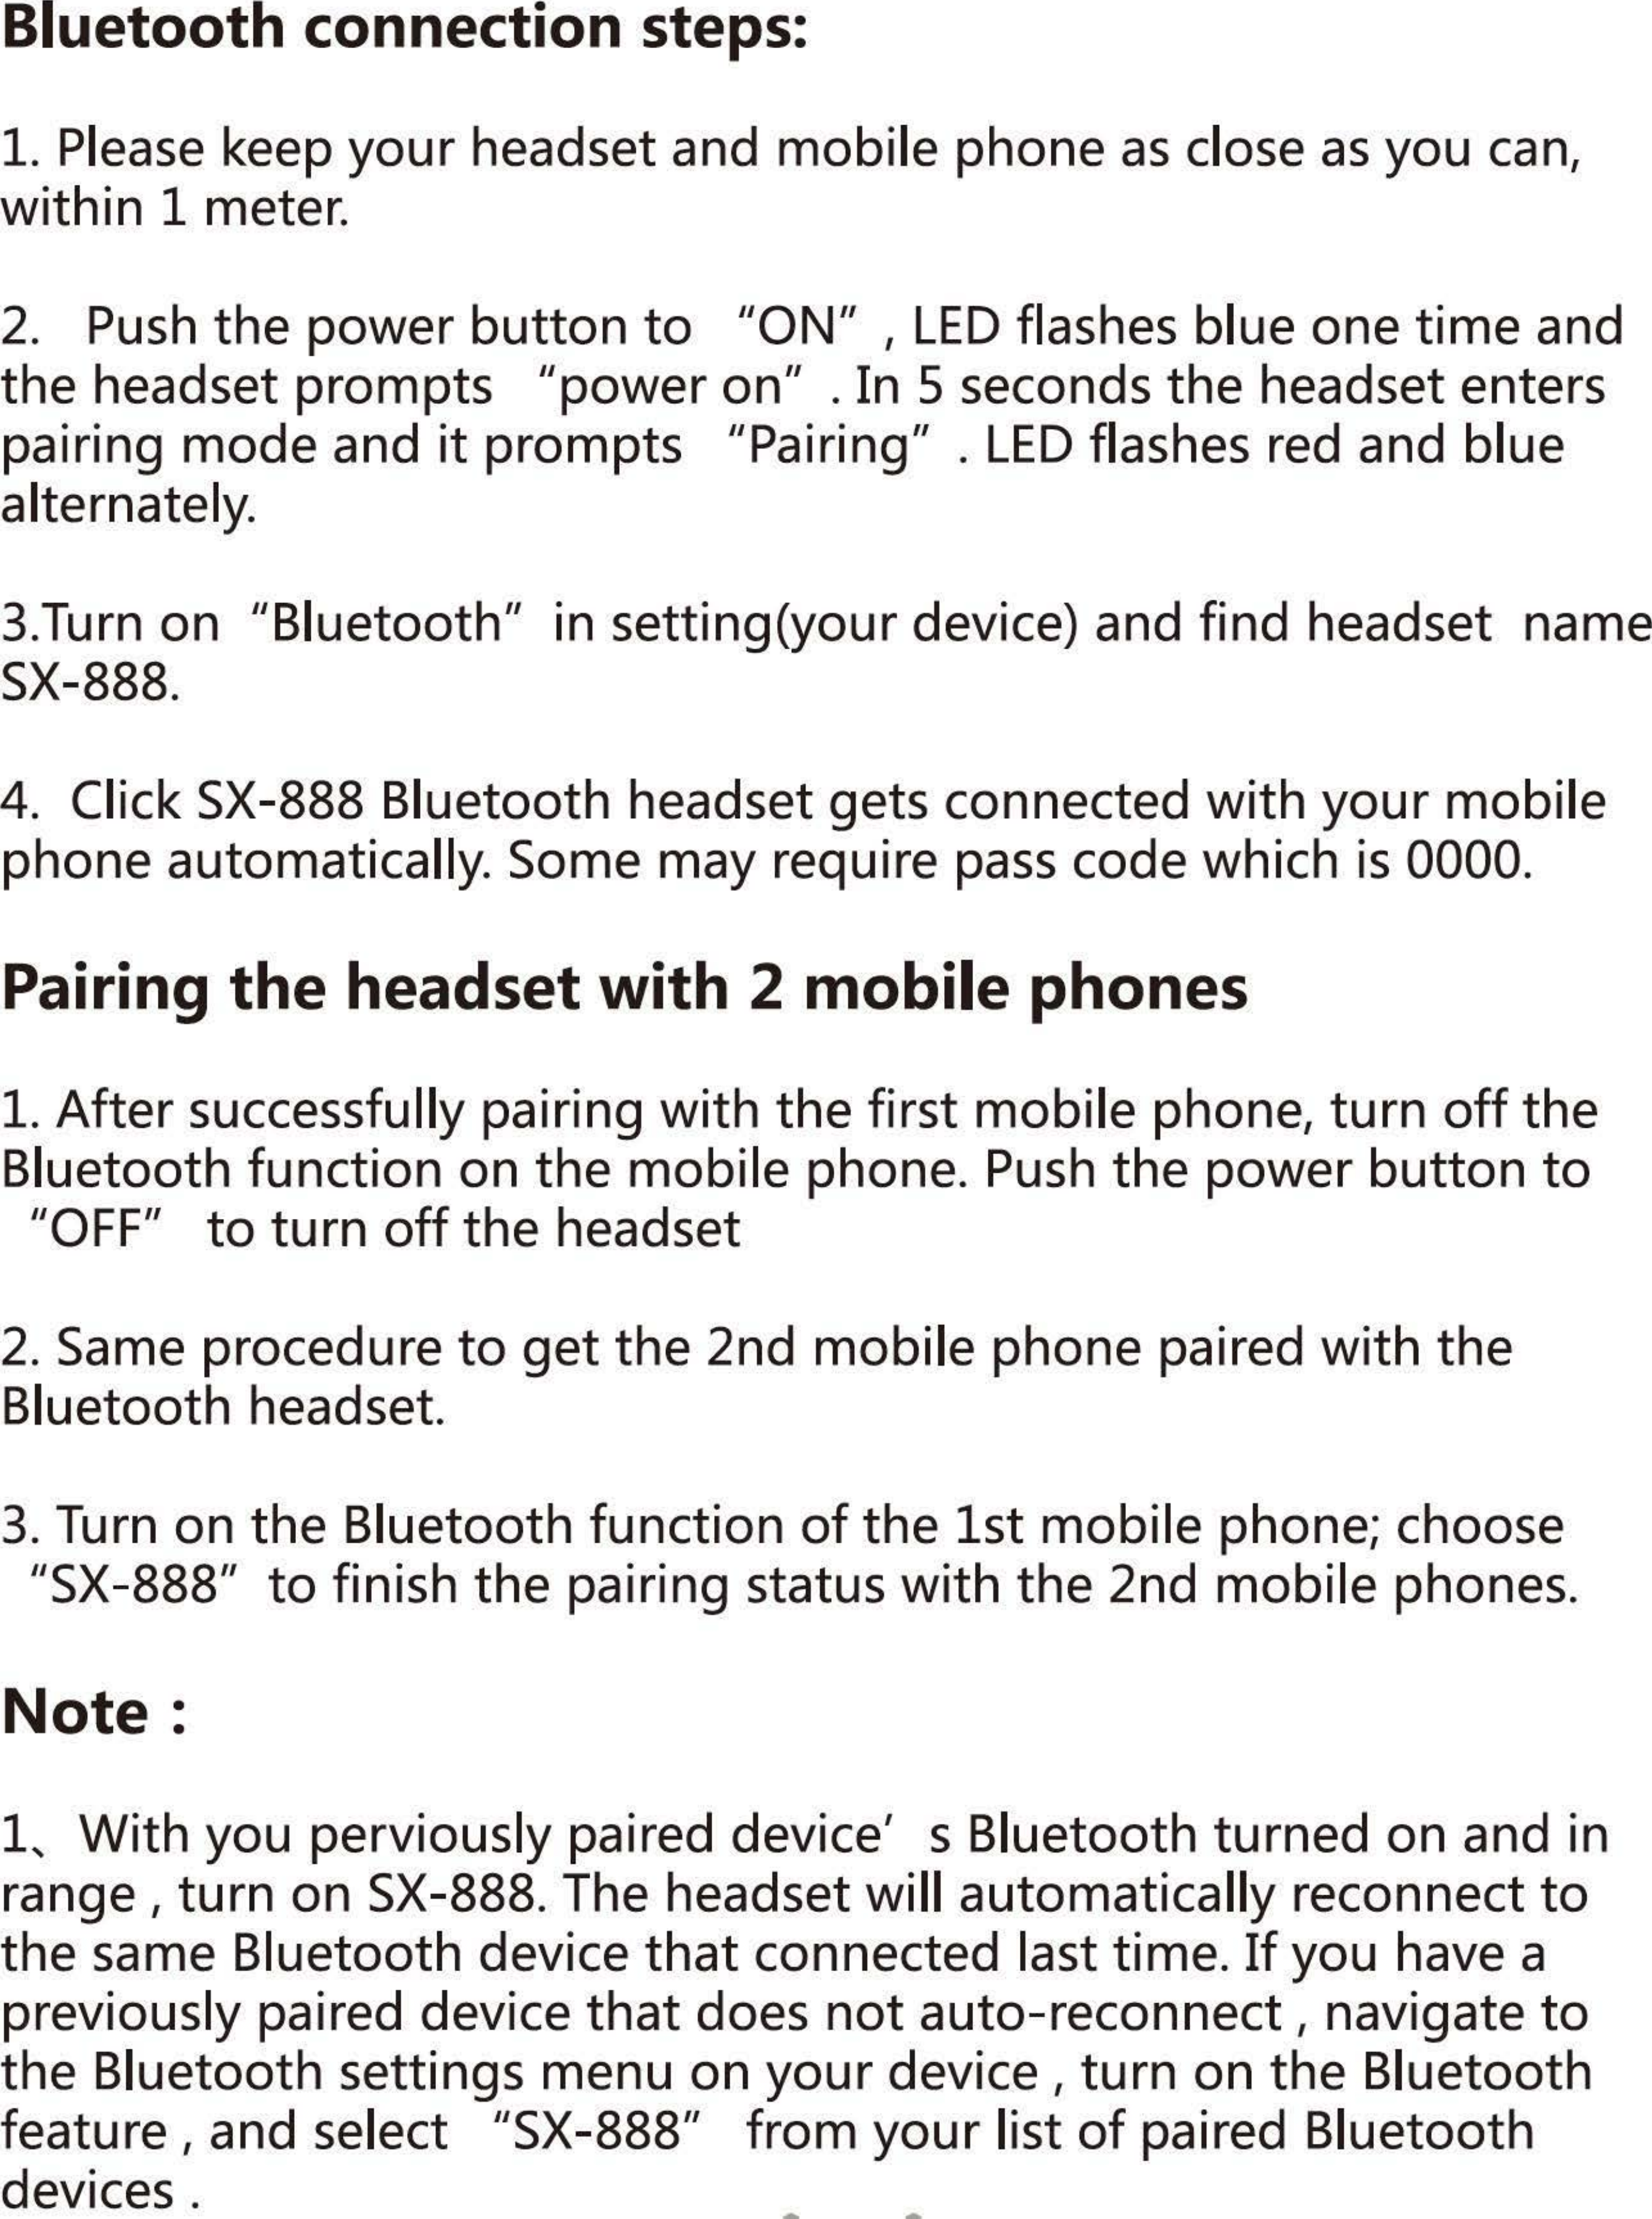 Bluetooth connection steps: 1. Please keep your headset and mobile phone as close as you can, within 1 meter. 2. Push the power button to &quot;0N&quot;, LED flashes blue one time and the headset prompts /lpower on/l • In 5 seconds the headset enters pairing mode and it prompts /lPairing/l. LED flashes red and blue alternately. 3.Turn on /lBluetooth/l in setting(your device) and find headset  name SX-888. 4.  Click SX-888 Bluetooth headset gets connected with your mobile phone automatically. Some may require pass code which is 0000. Pairing the headset with 2 mobile phones 1. After successfully pairing with the first mobile phone, turn off the Bluetooth function on the mobile phone. Push the power button to /lOFF&quot; to turn off the headset 2. Same procedure to get the 2nd mobile phone paired with the Bluetooth headset. 3. Turn on the Bluetooth function of the 1st mobile phone; choose 飞X-888&quot;to finish the pairing status with the 2nd mobile phones. Note: 1、Withyou perviously paired device&apos;  s Bluetooth turned on and in range , turn on SX-888. The headset will automatically reconnect to the same Bluetooth device that connected last time. If you have a previously paired device that does not auto-reconnect I  navigate to the Bluetooth settings menu on your device , turn on the Bluetooth feature , and select /lSX-888&quot; from your list of paired Bluetooth devices. 